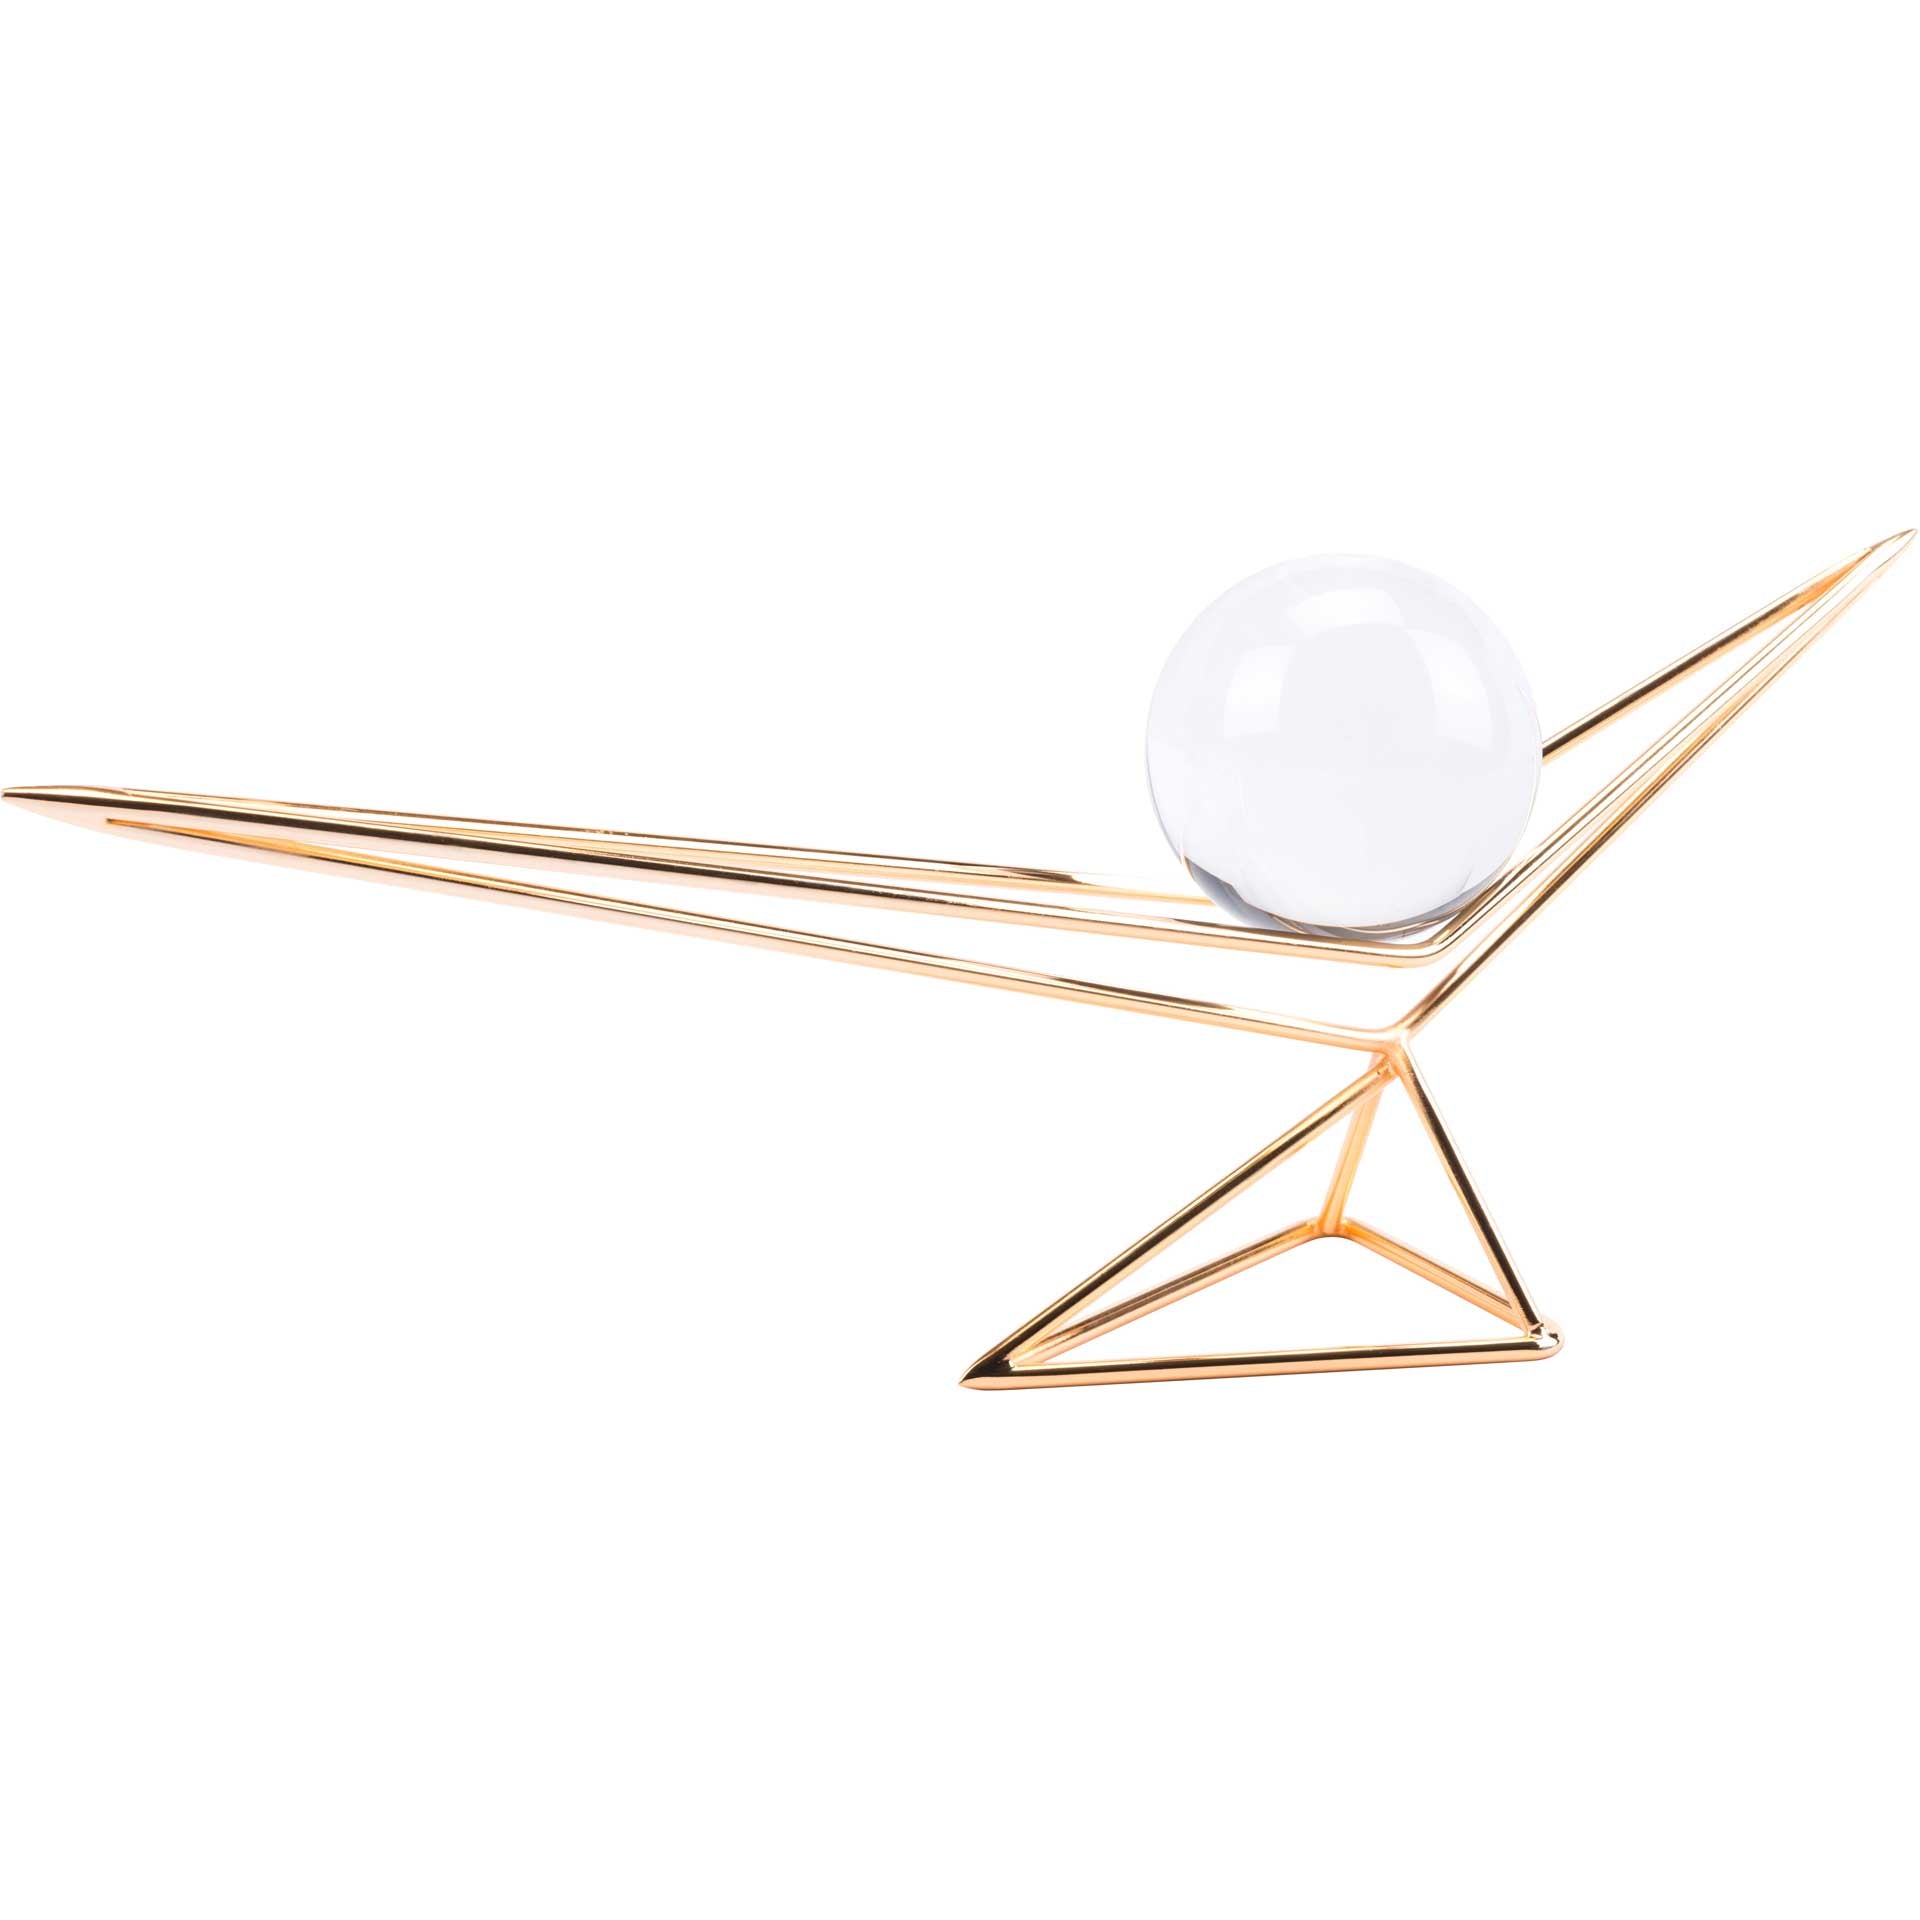 Origami Orb Gold